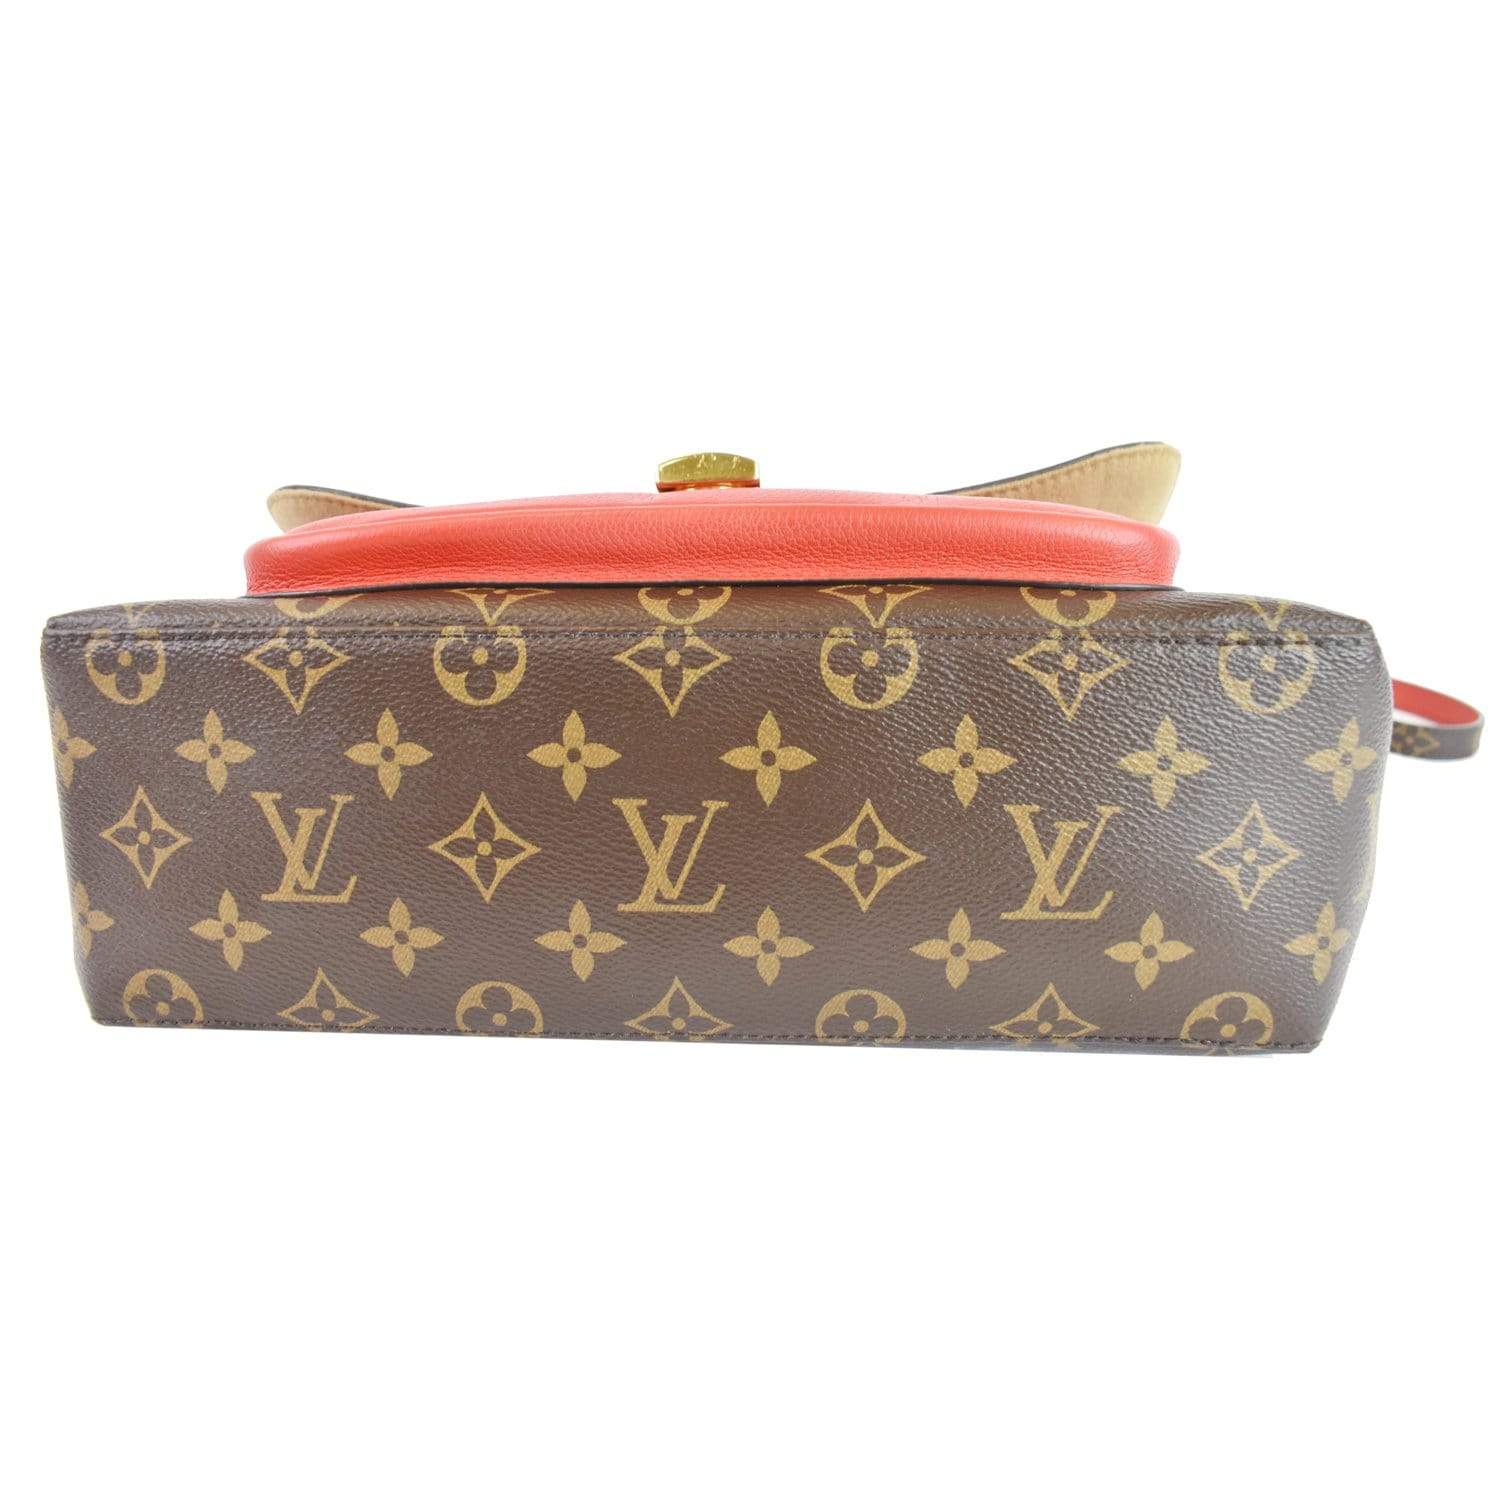 Buy Louis Vuitton Monogram LOUIS VUITTON Marignan Monogram M44286 2Way Bag  Brown Coquelicot / 350611 [Used] from Japan - Buy authentic Plus exclusive  items from Japan